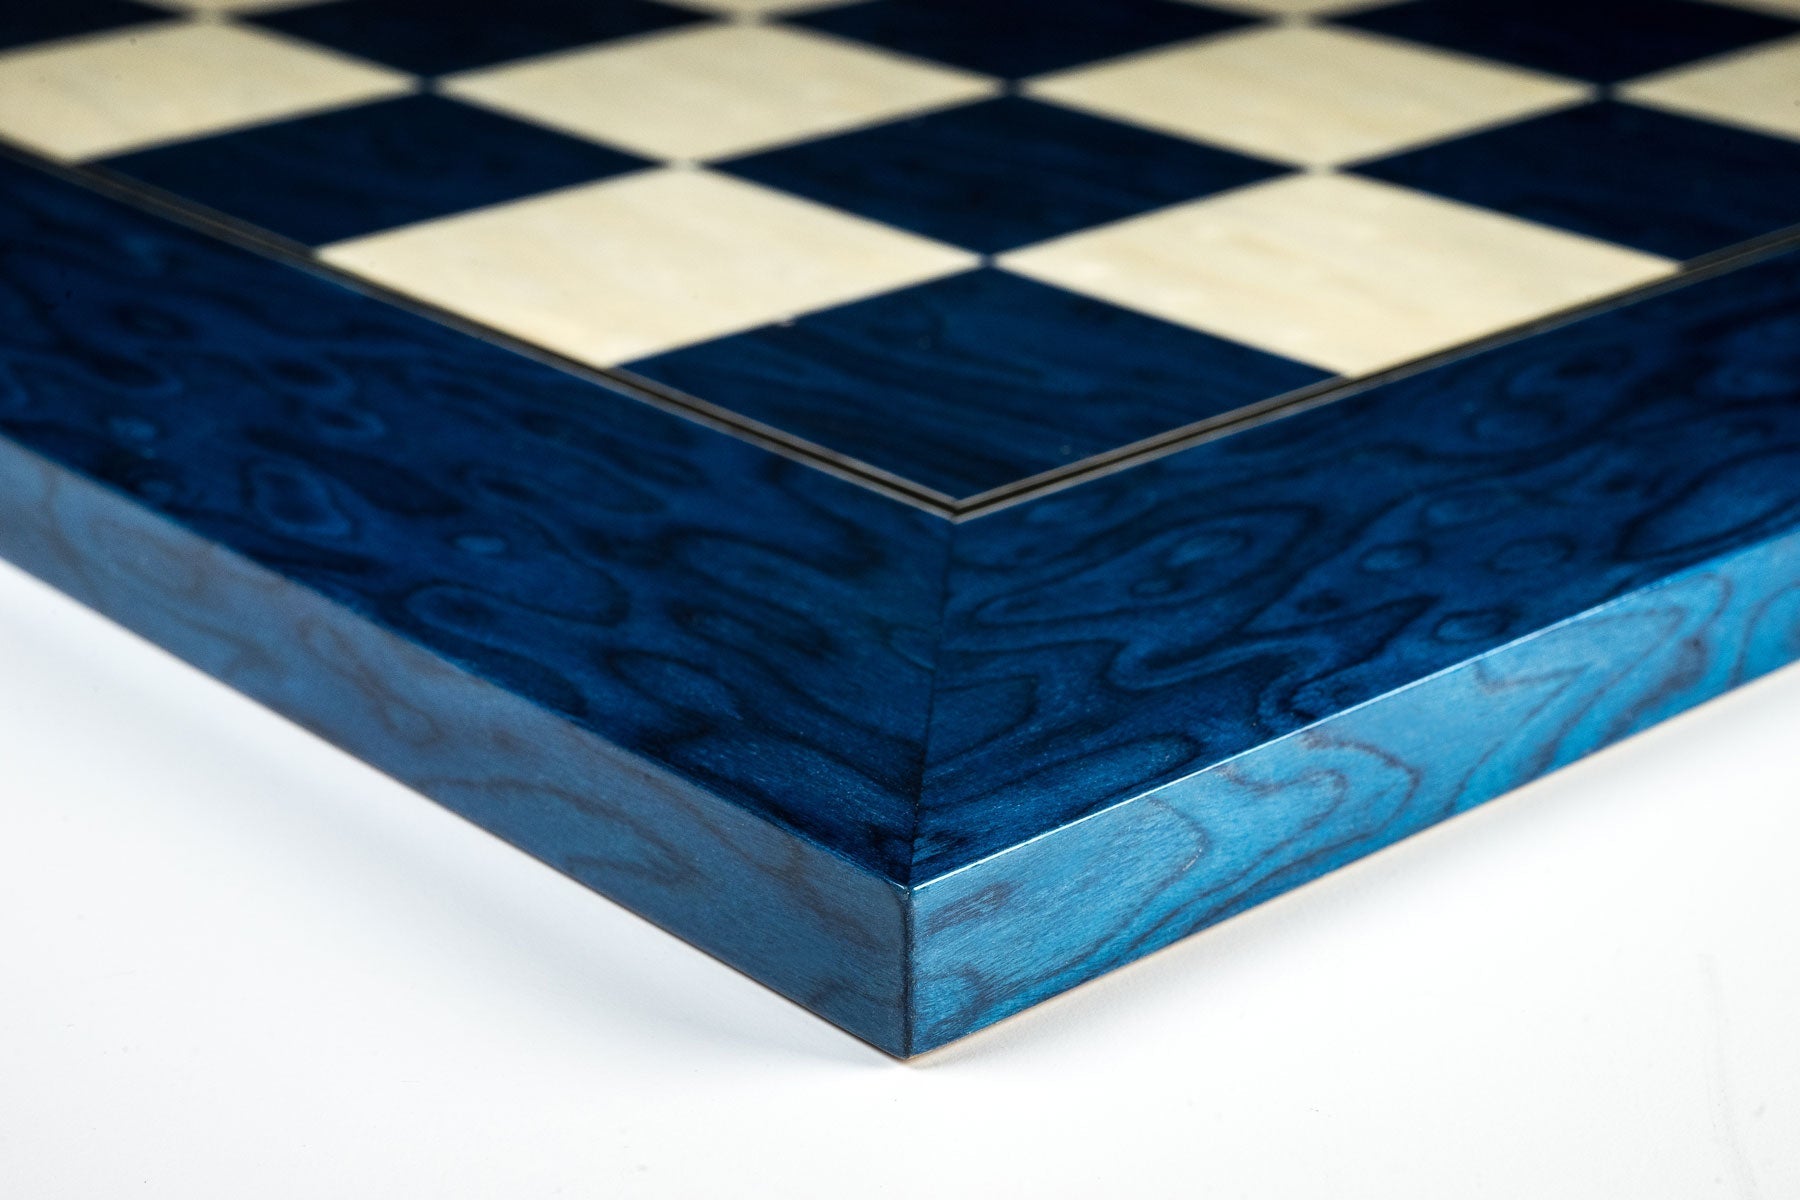 15.5 inch Blue & Madrona Tan Inlaid veneer Chess Board (1.5 inch Squares)